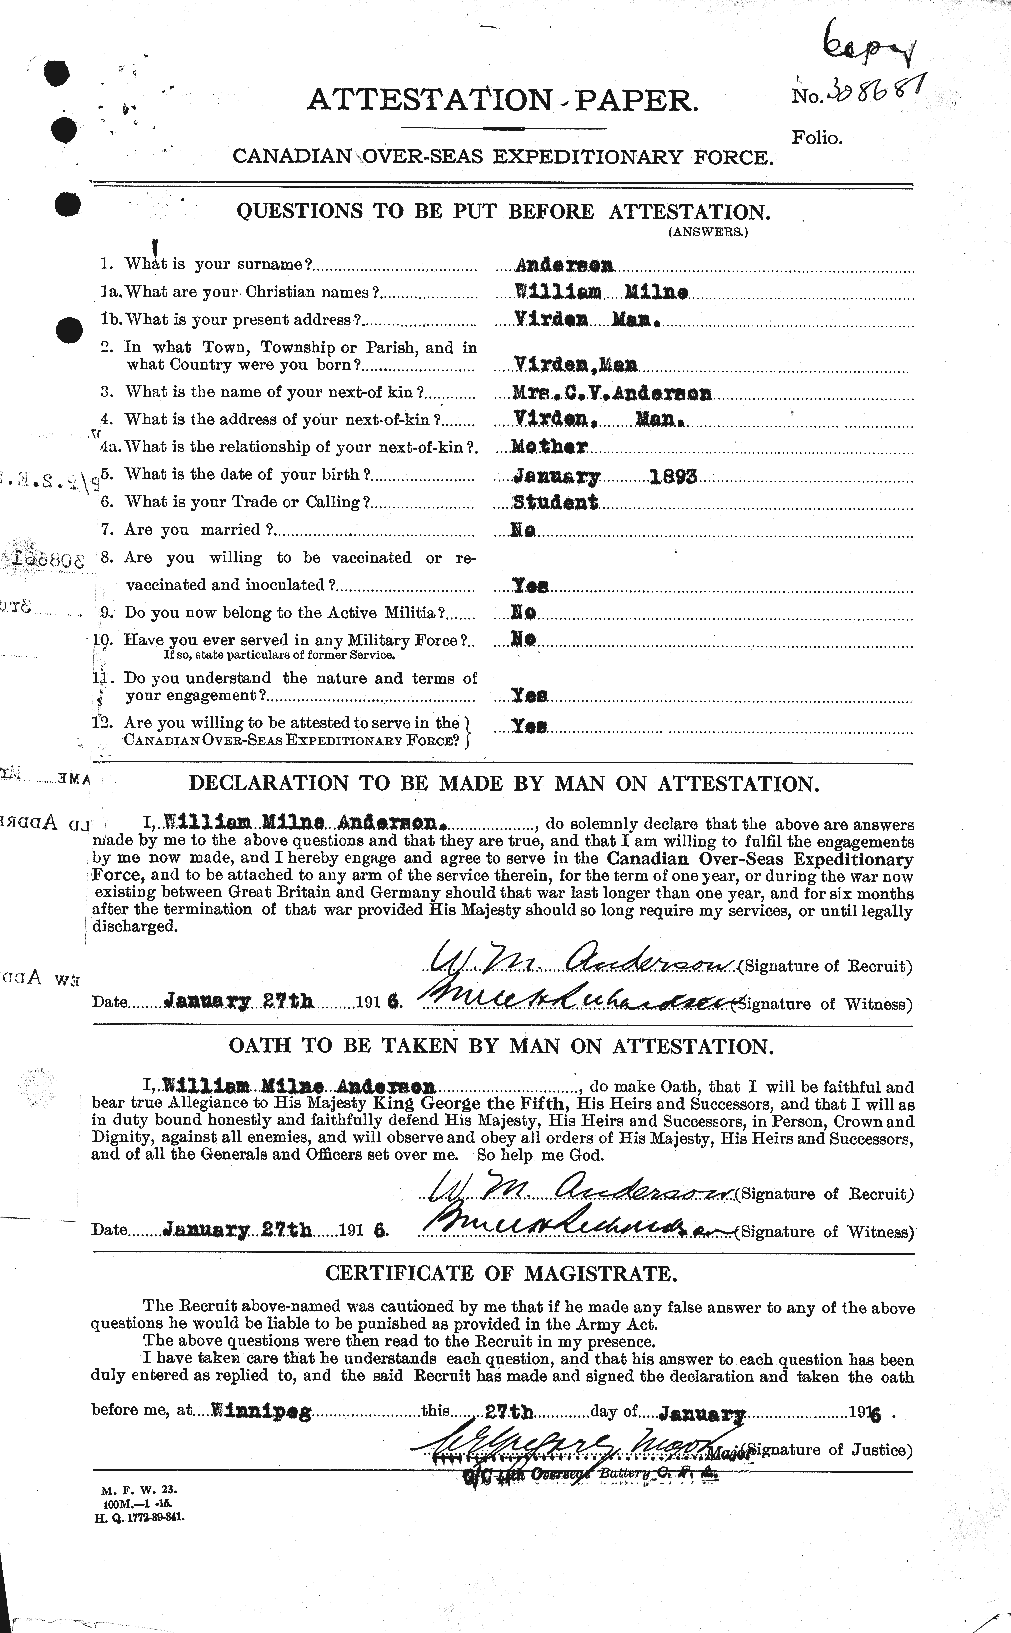 Personnel Records of the First World War - CEF 210835a